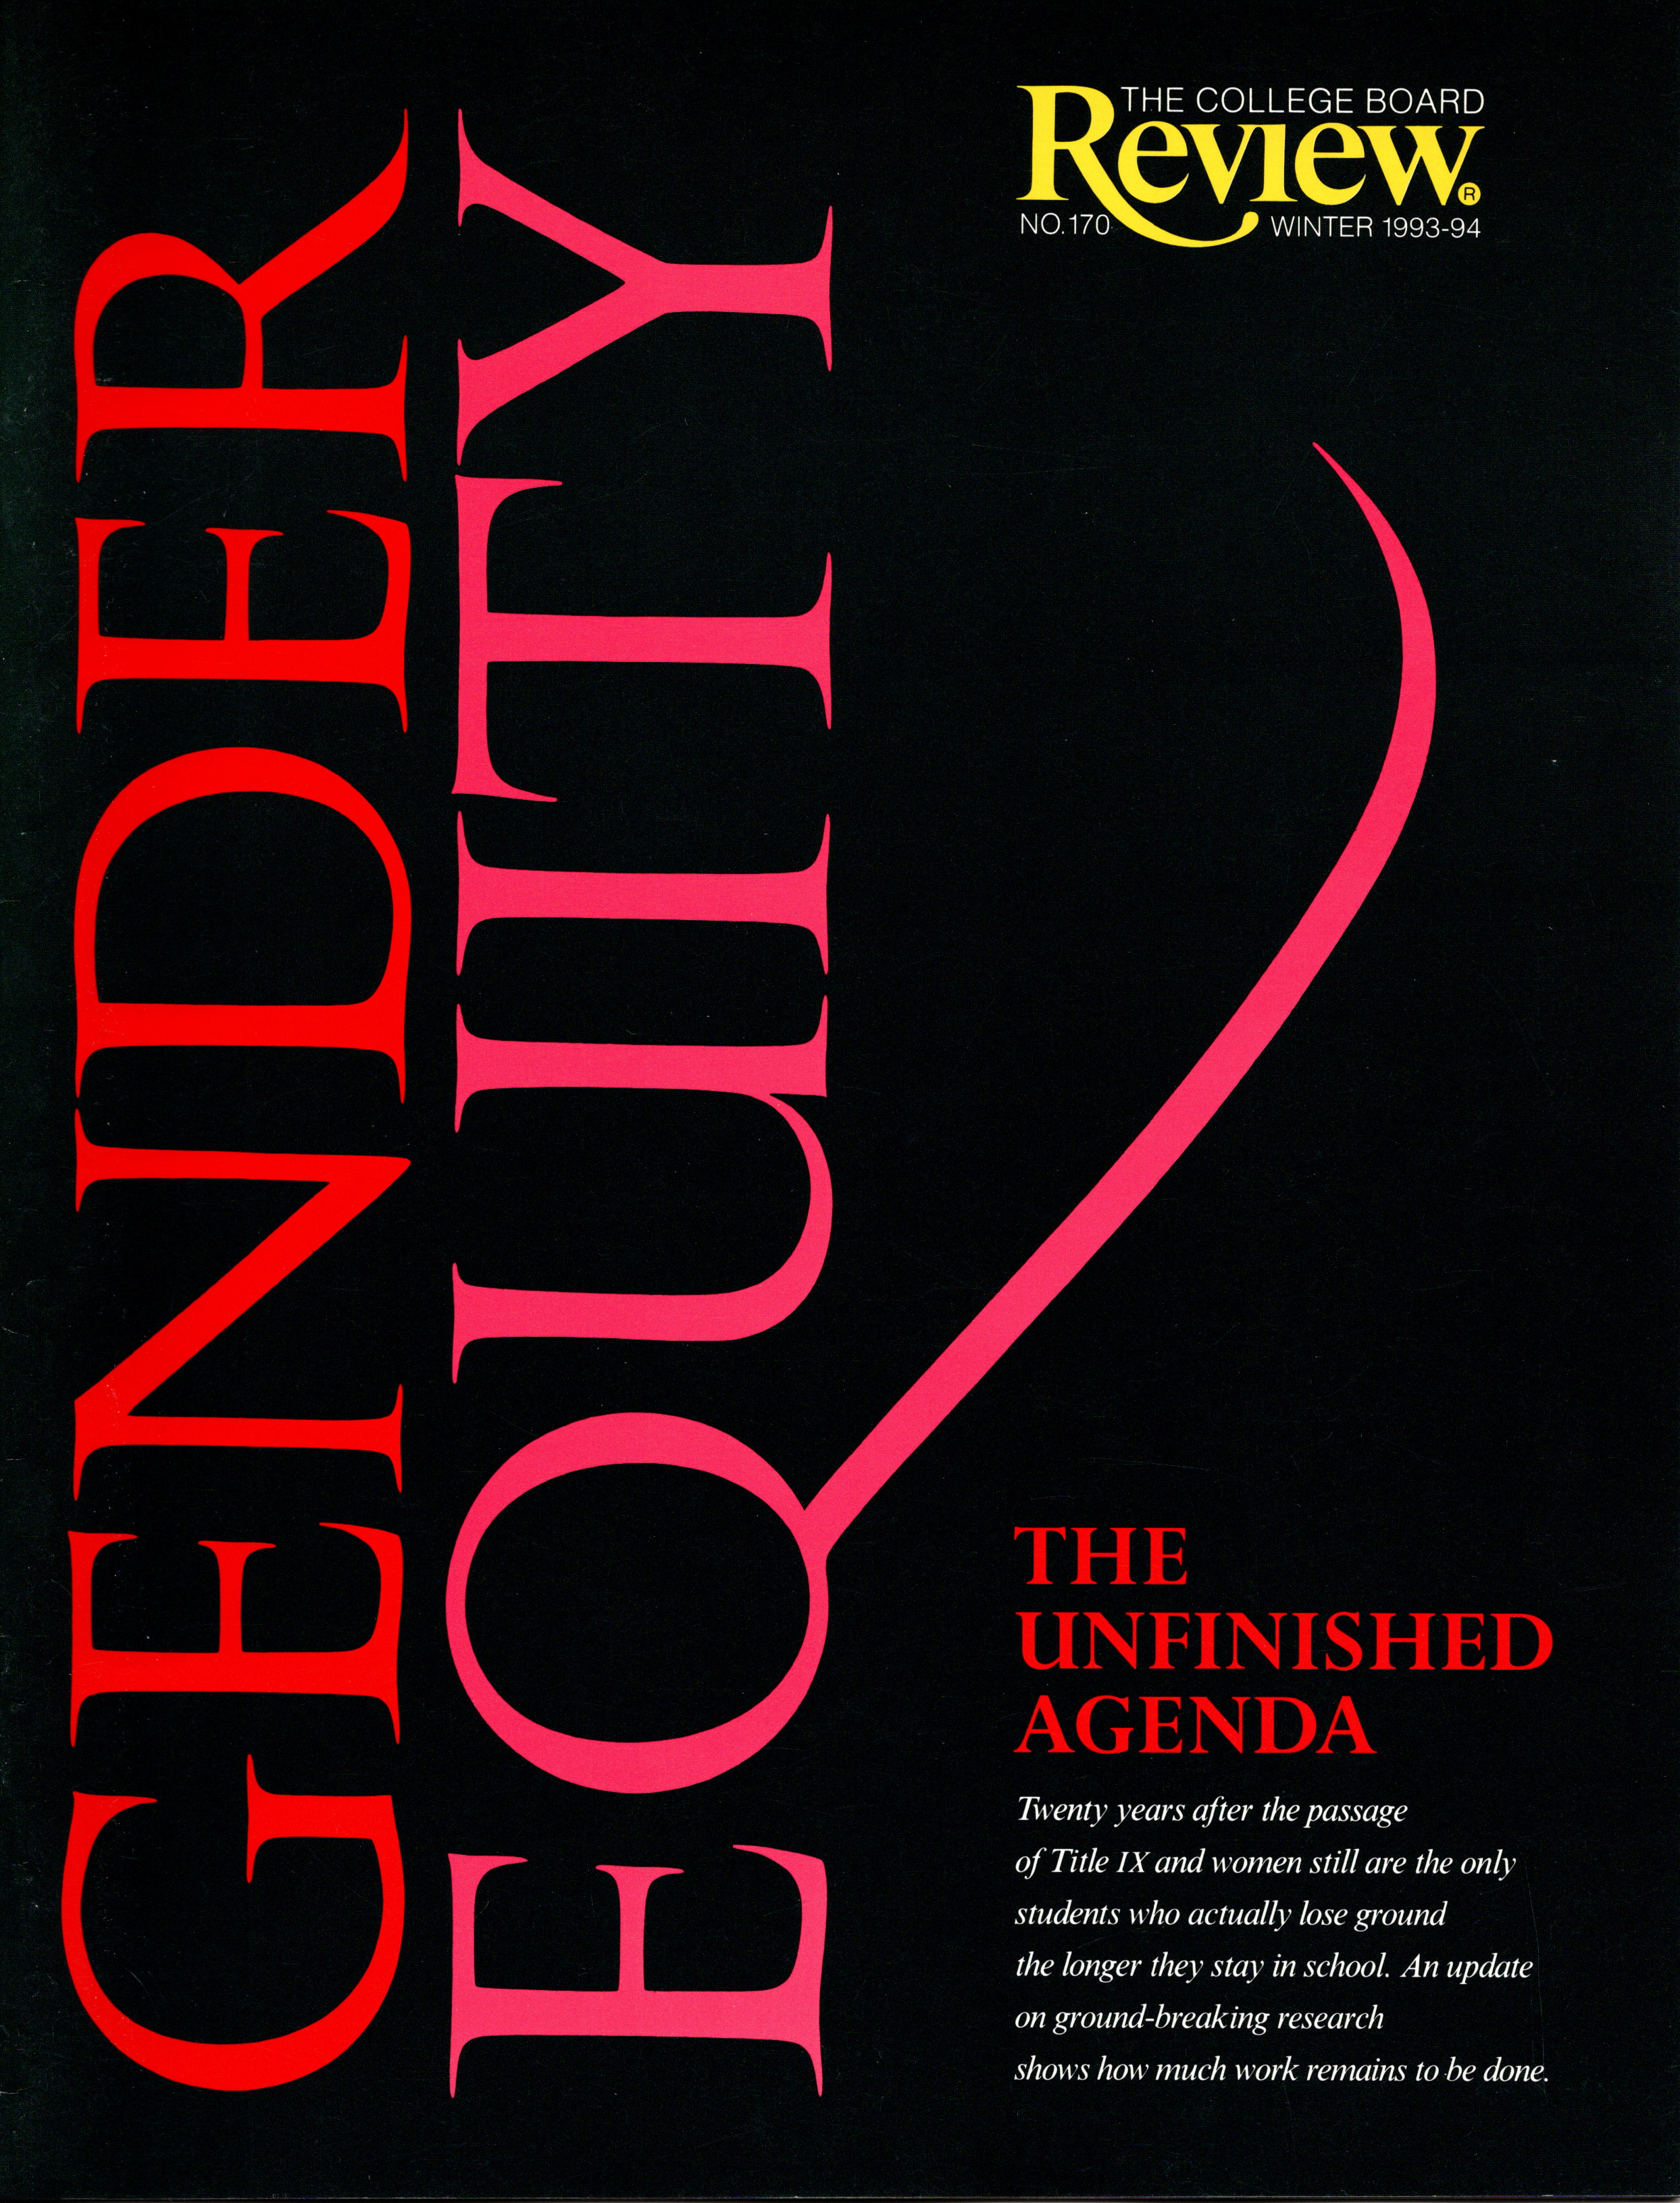 Cover of the winter 1993-94 issue of the College Board Review magazine with the words Gender Equity in red and pink letters running down the left side against a black background